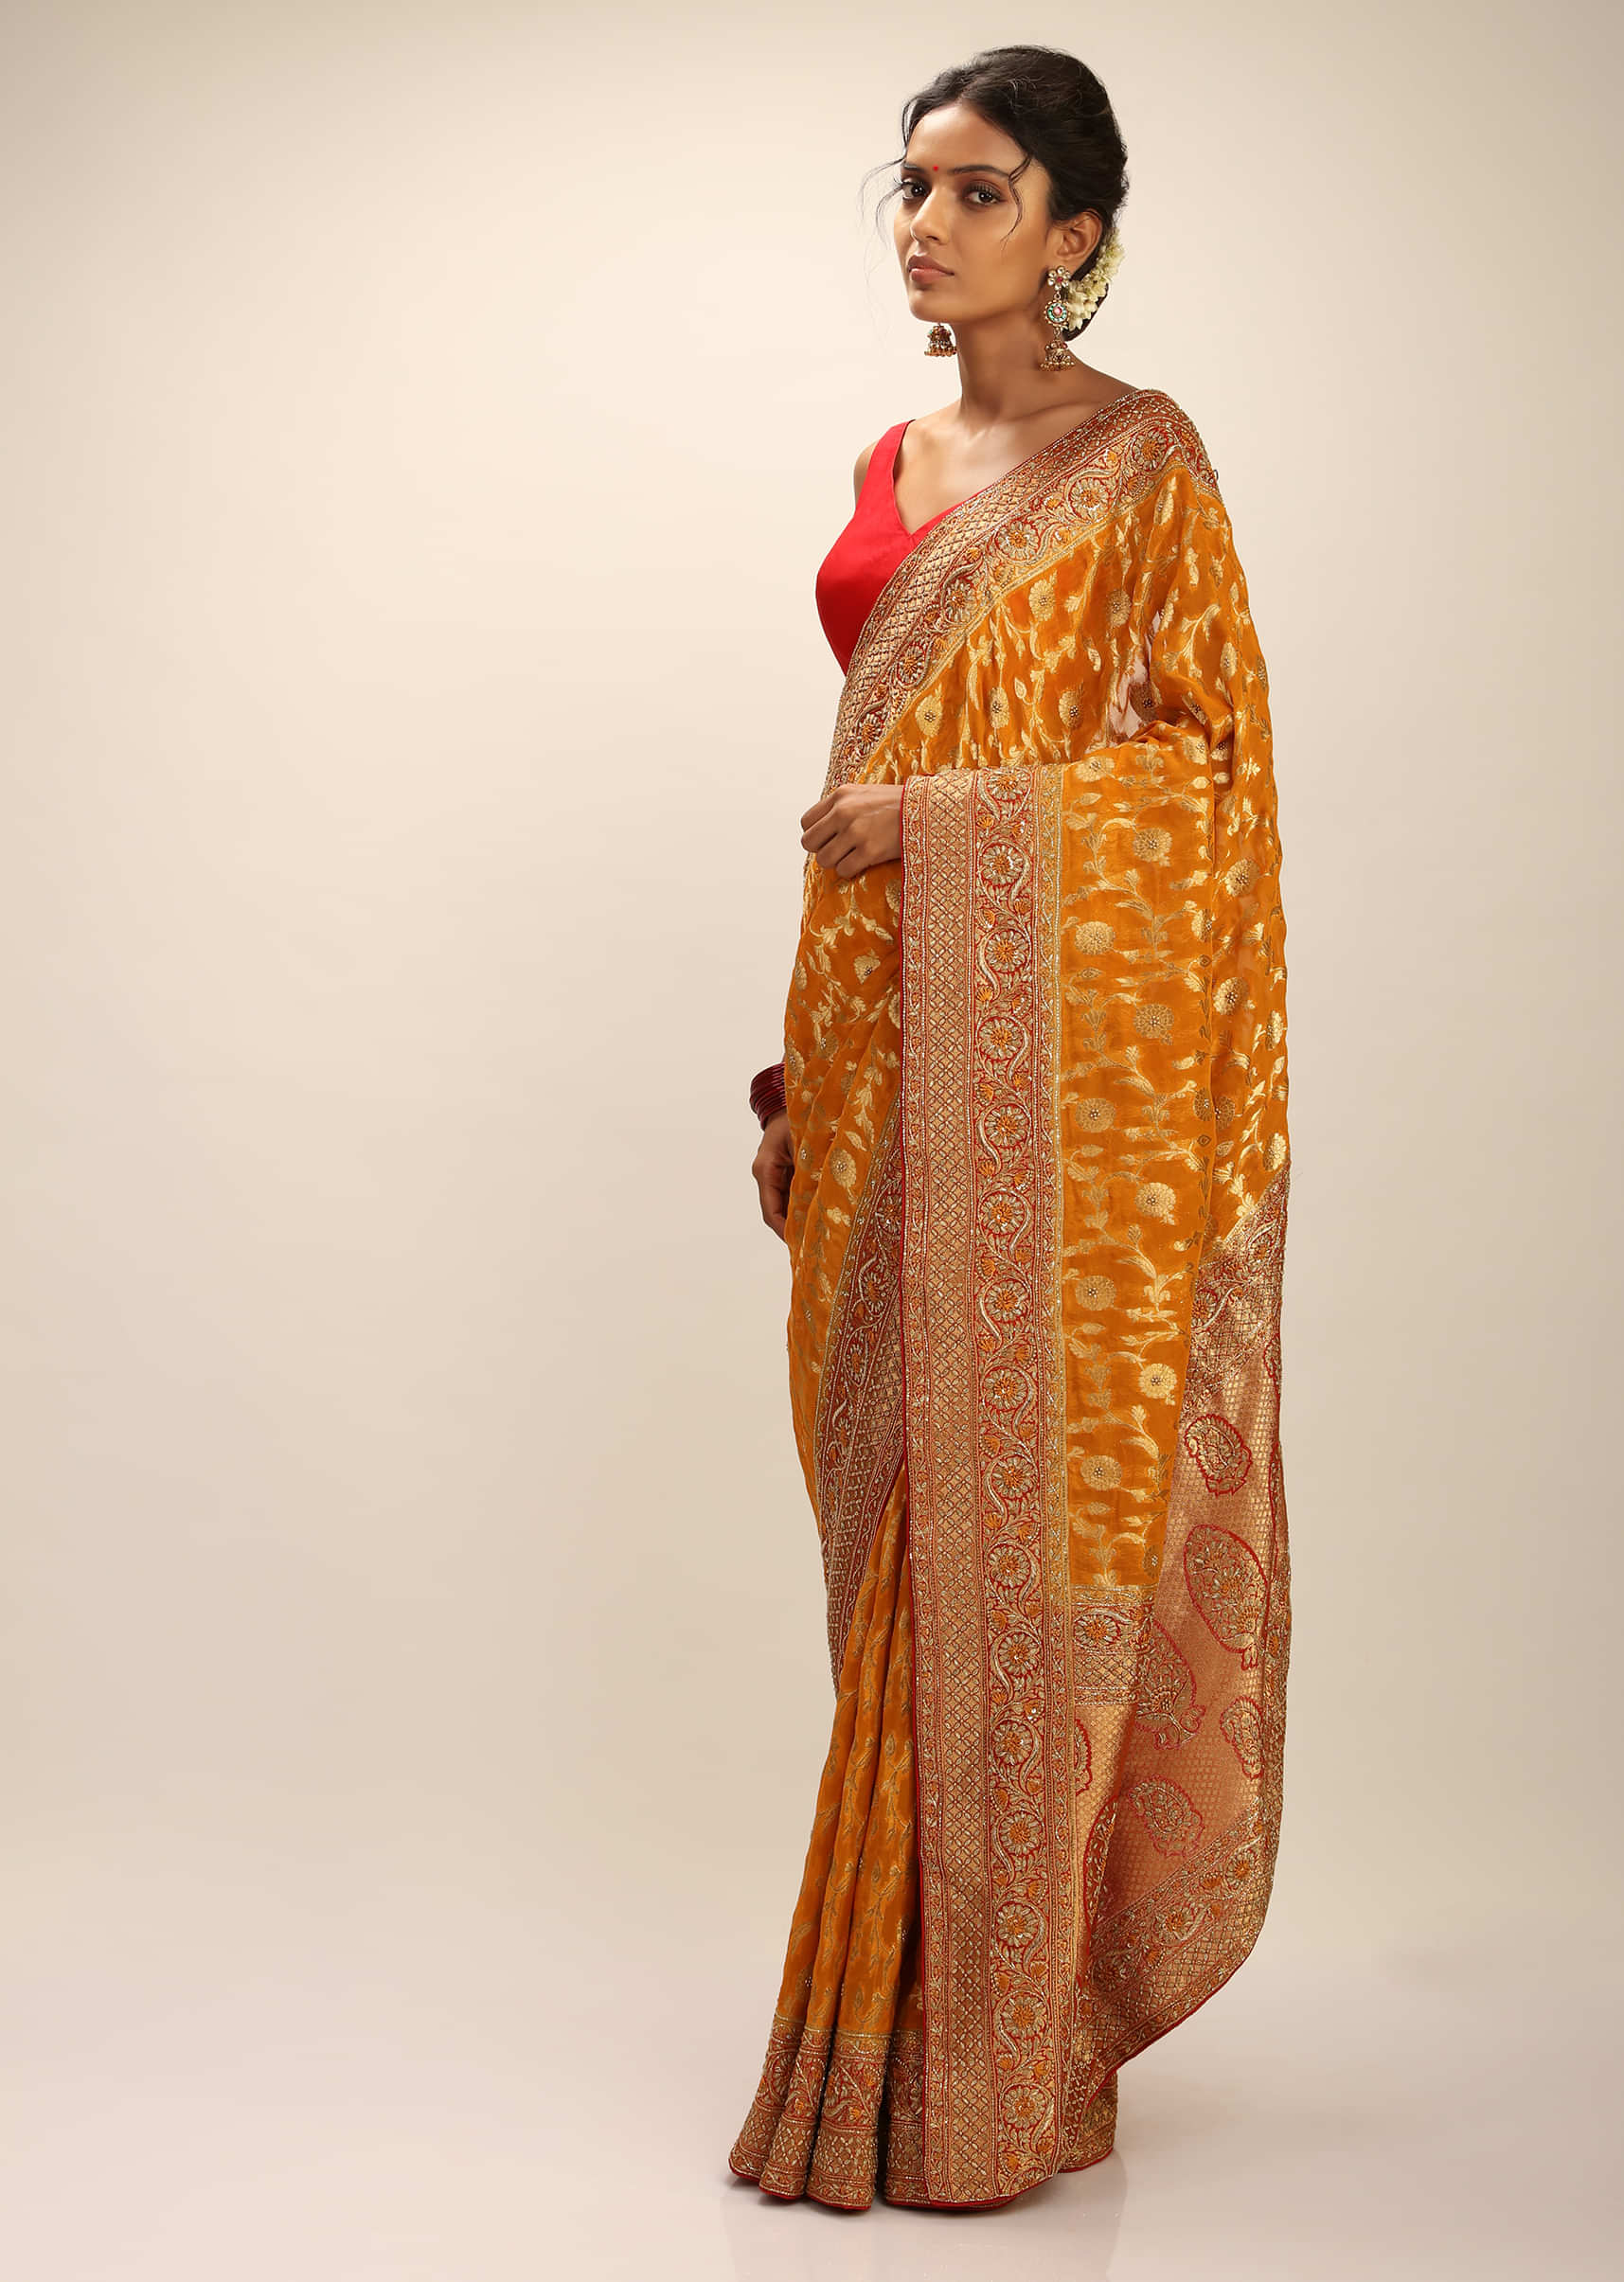 Mustard Banarasi Saree In Georgette With Woven Floral Jaal And Zardosi Embroidery Detailing  